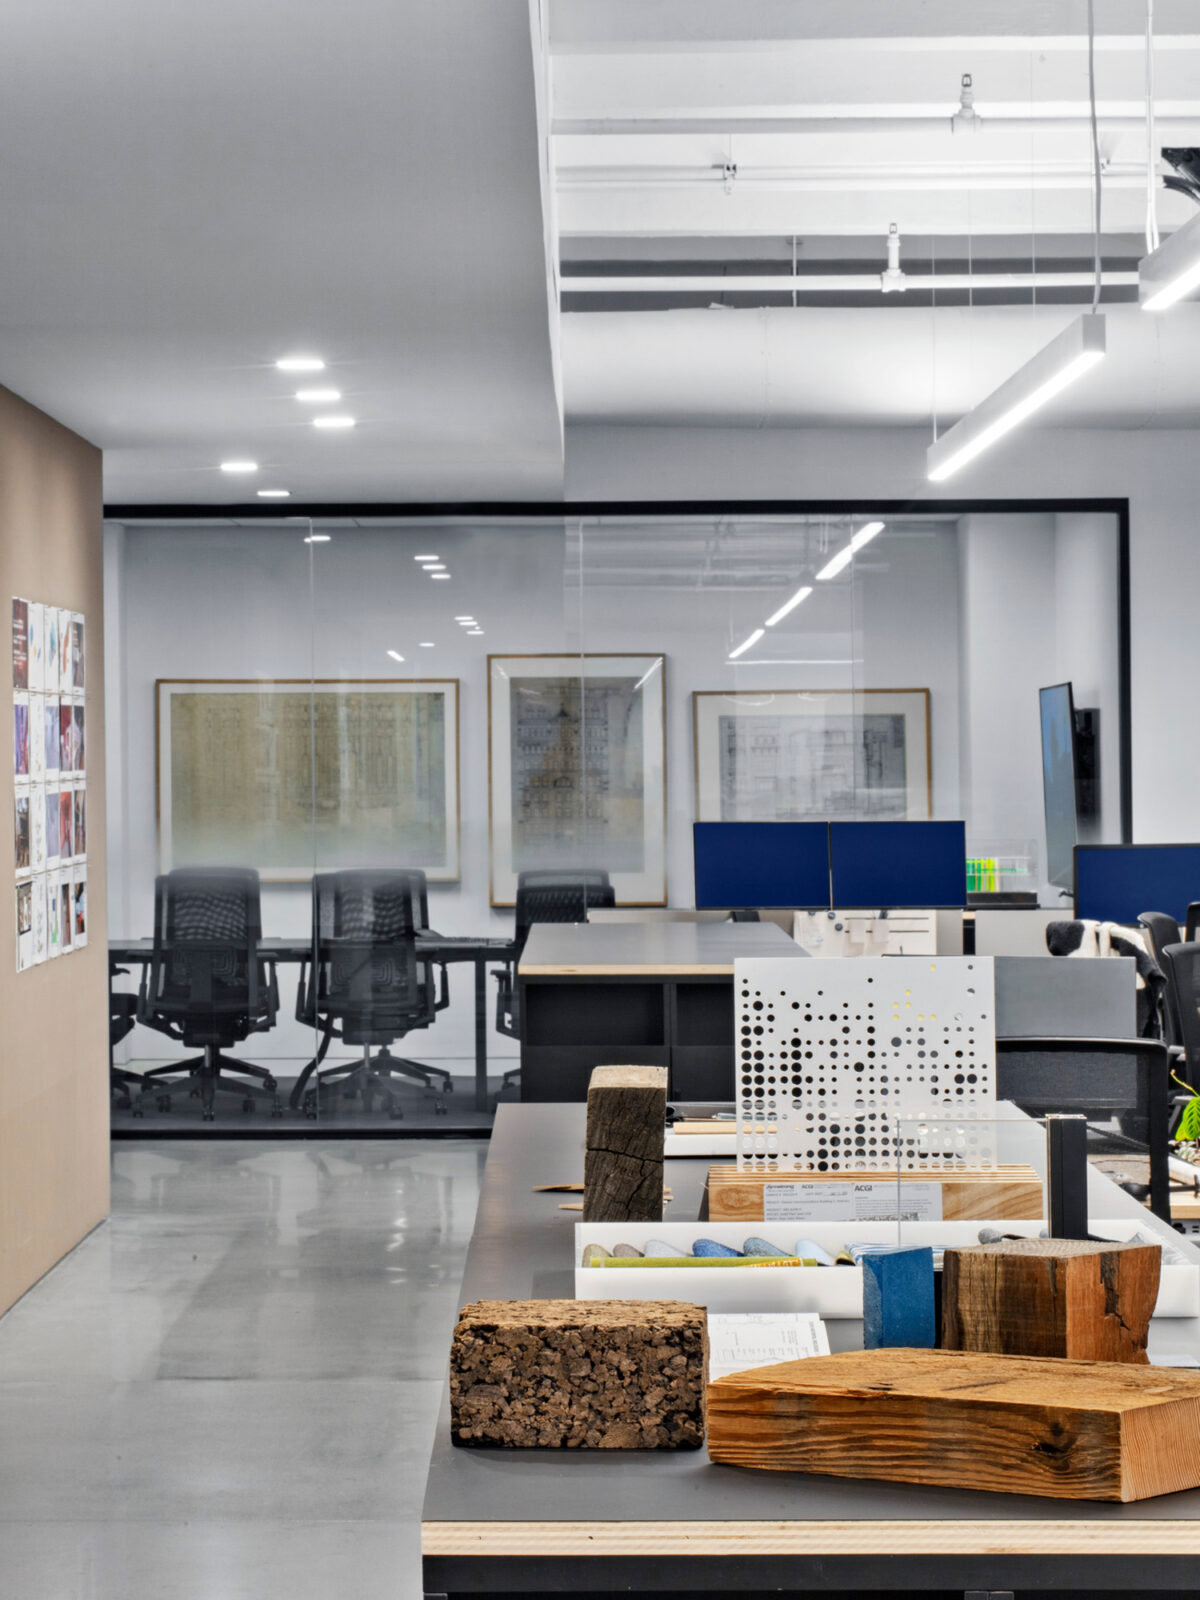 An open-concept office space with a mix of materials and textures on display, including wood, cork, and perforated metal, paired with sleek furniture, creating a creative and tactile material library.